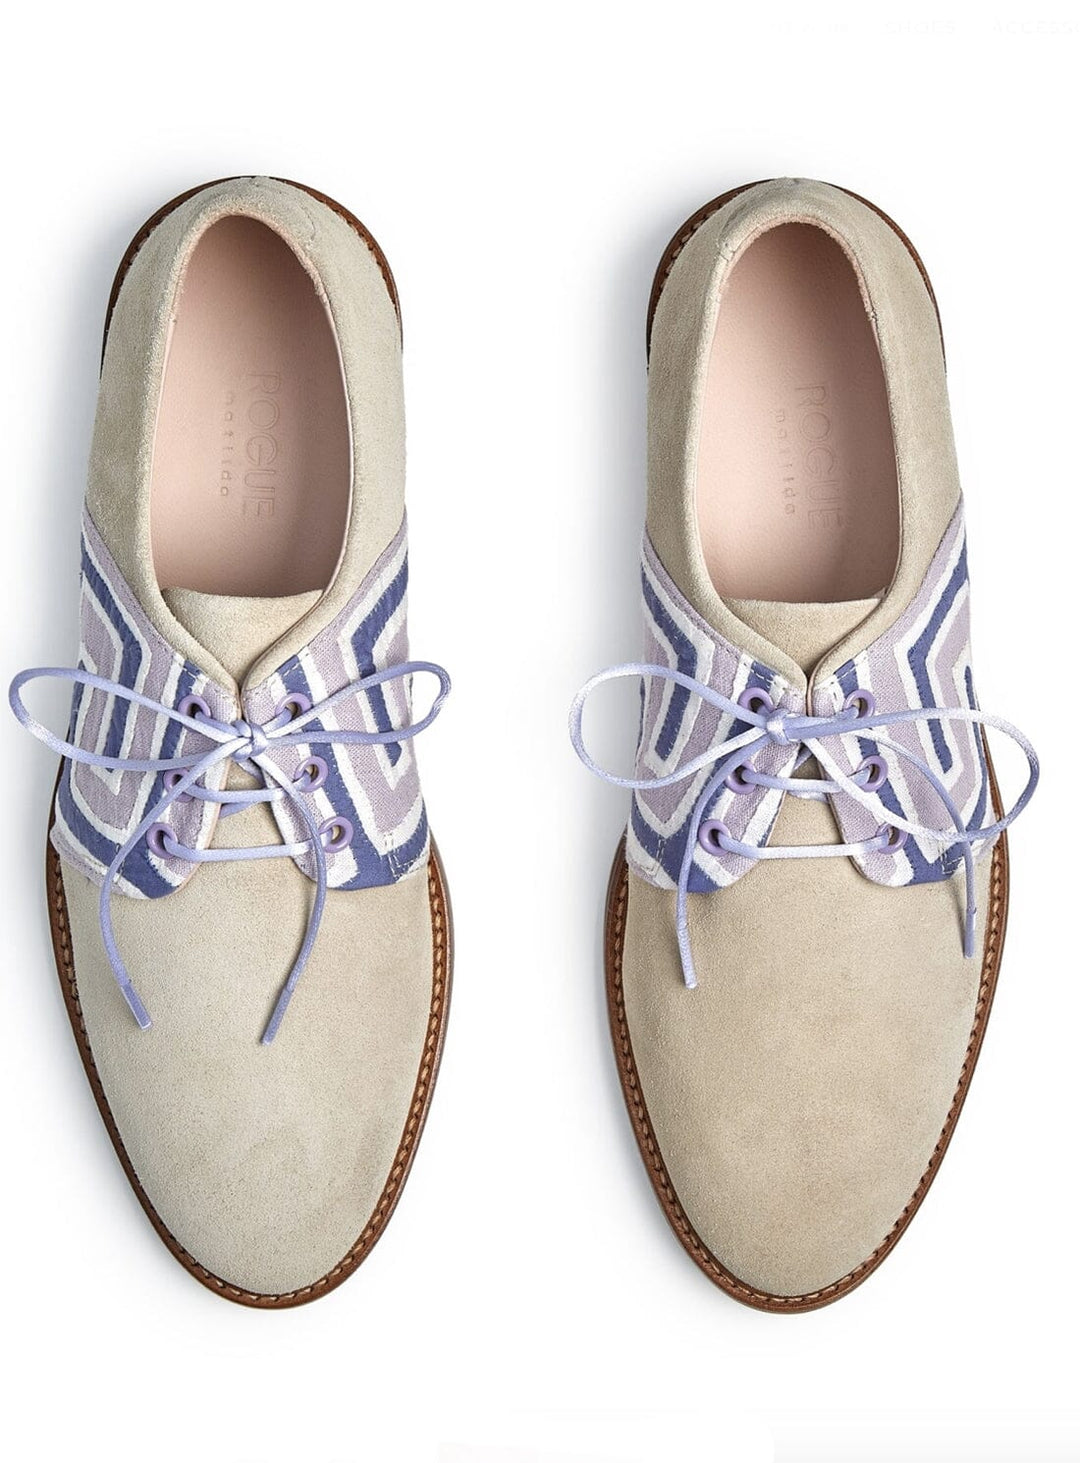 Jive in Ecru Suede with Purple Shoes YBDFinds 